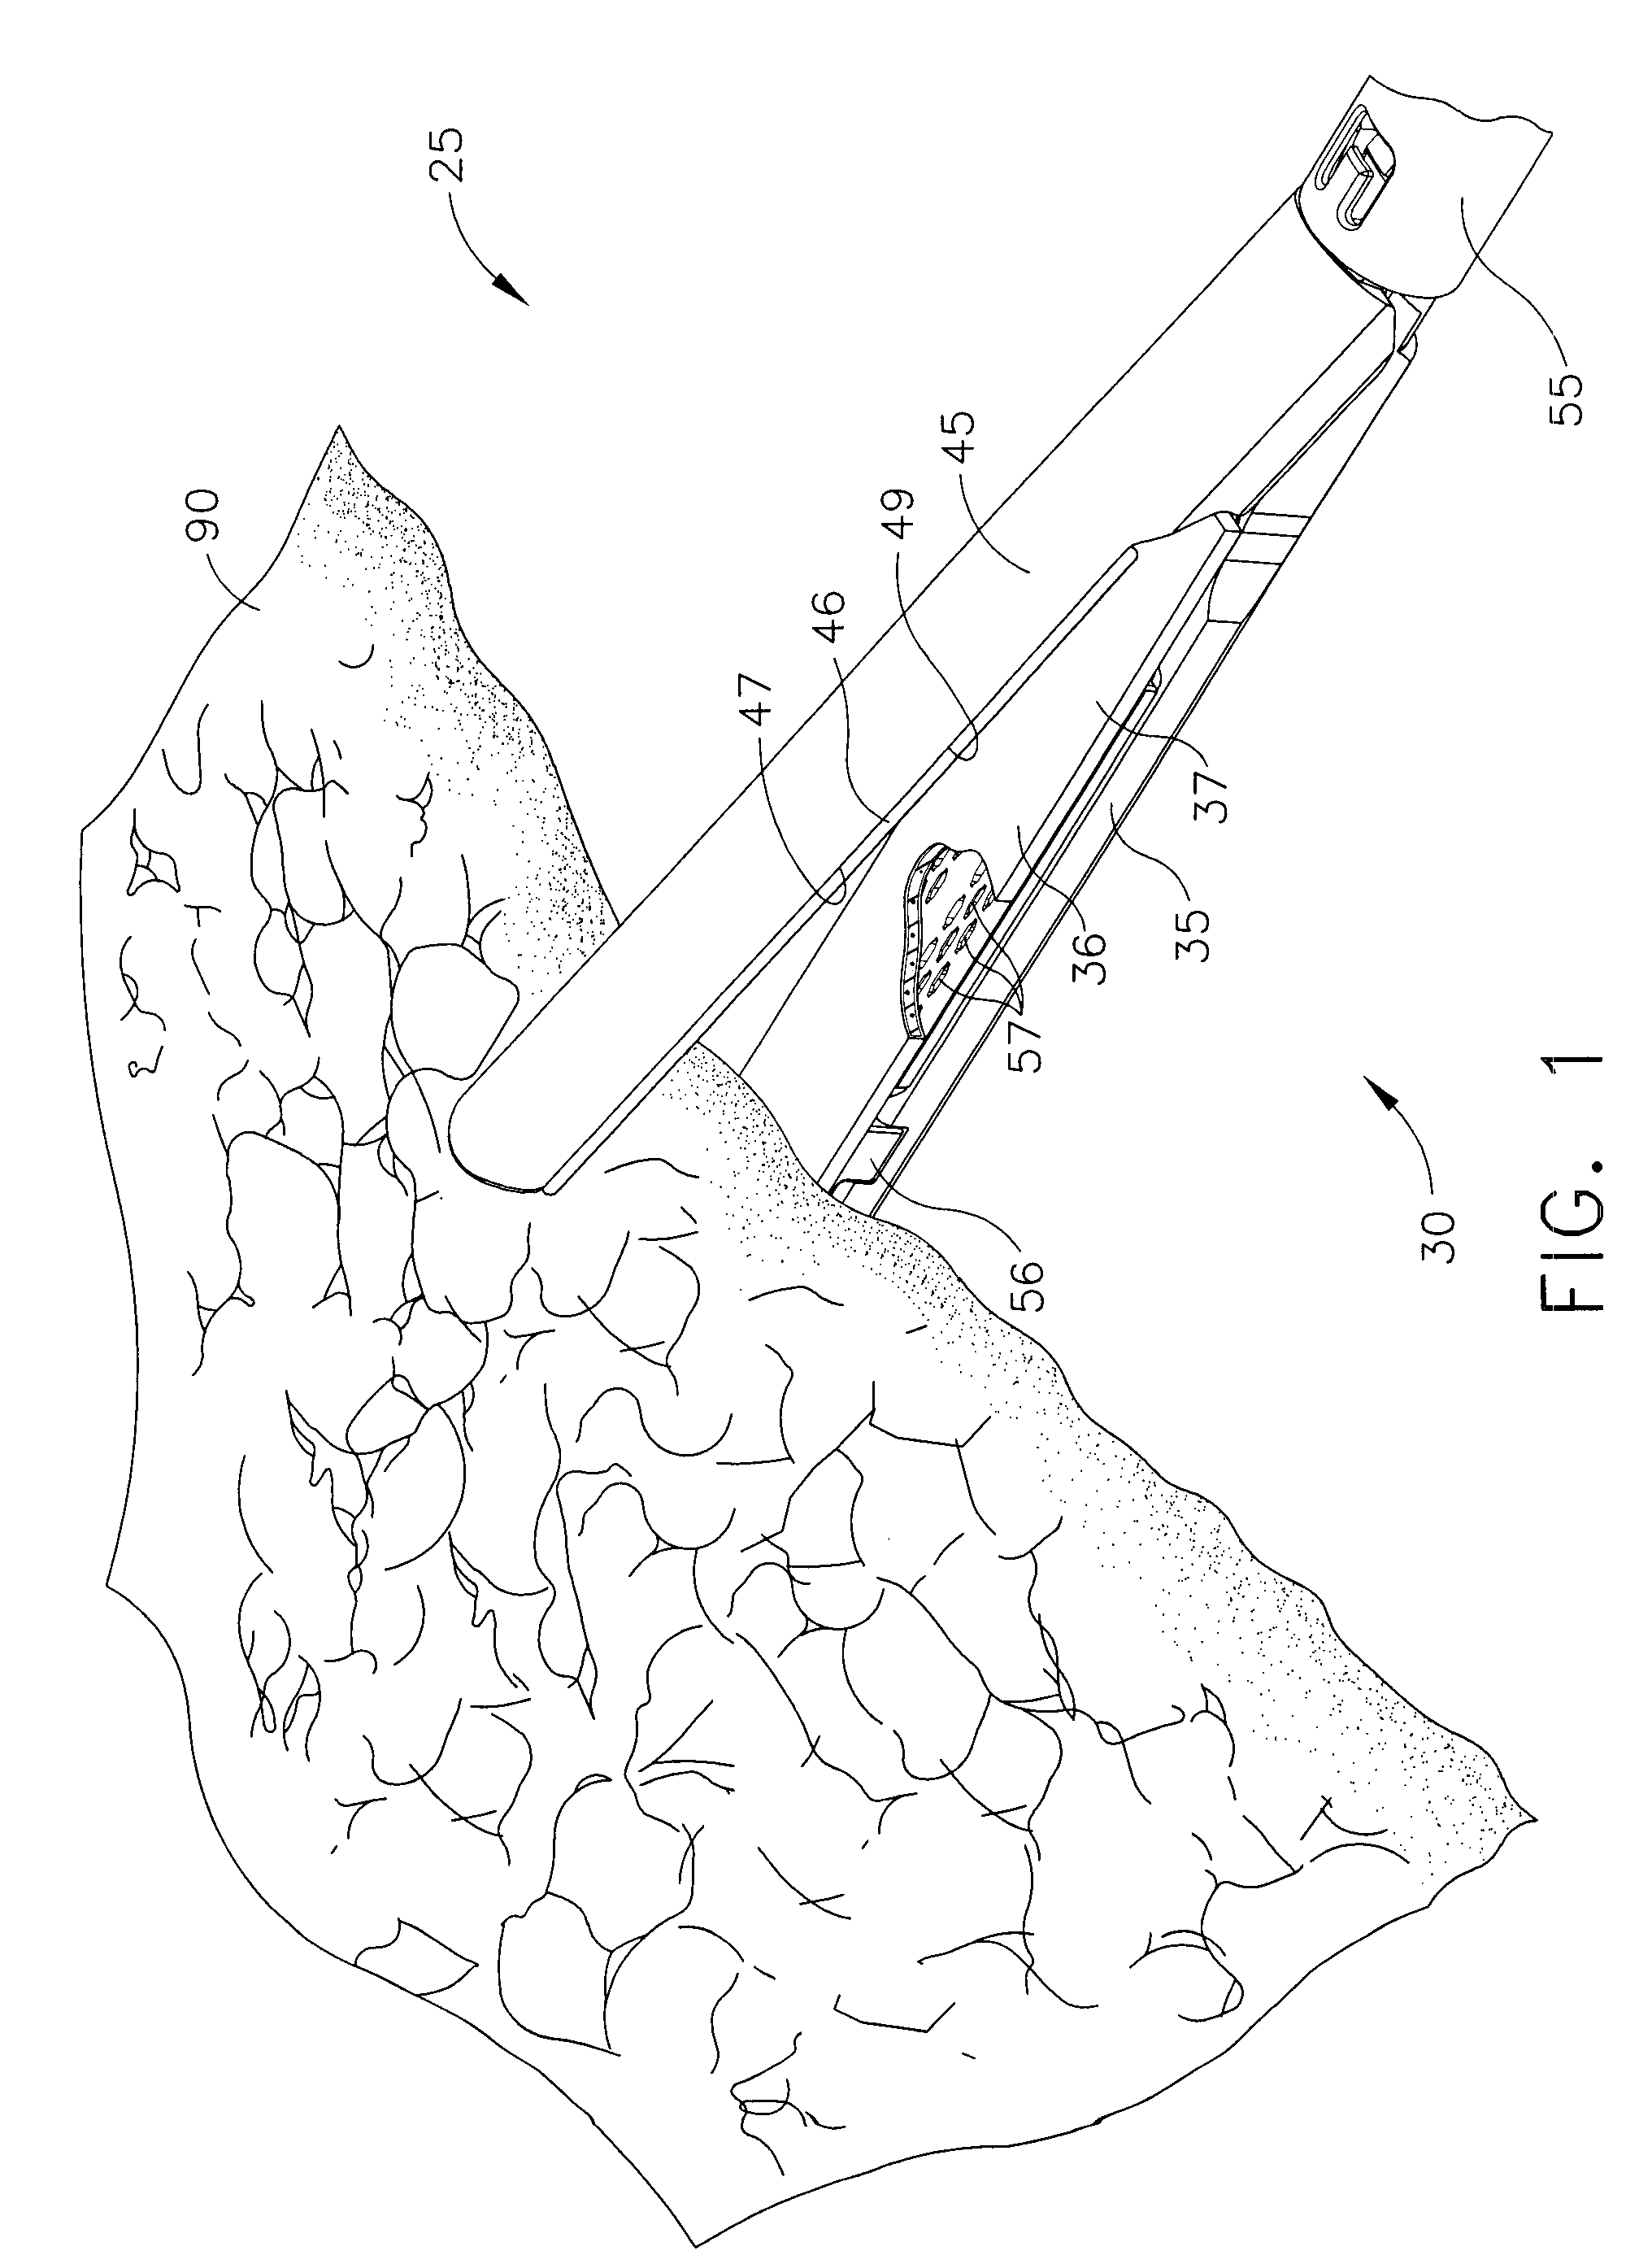 Surgical fastening device with initiator impregnation of a matrix or buttress to improve adhesive application